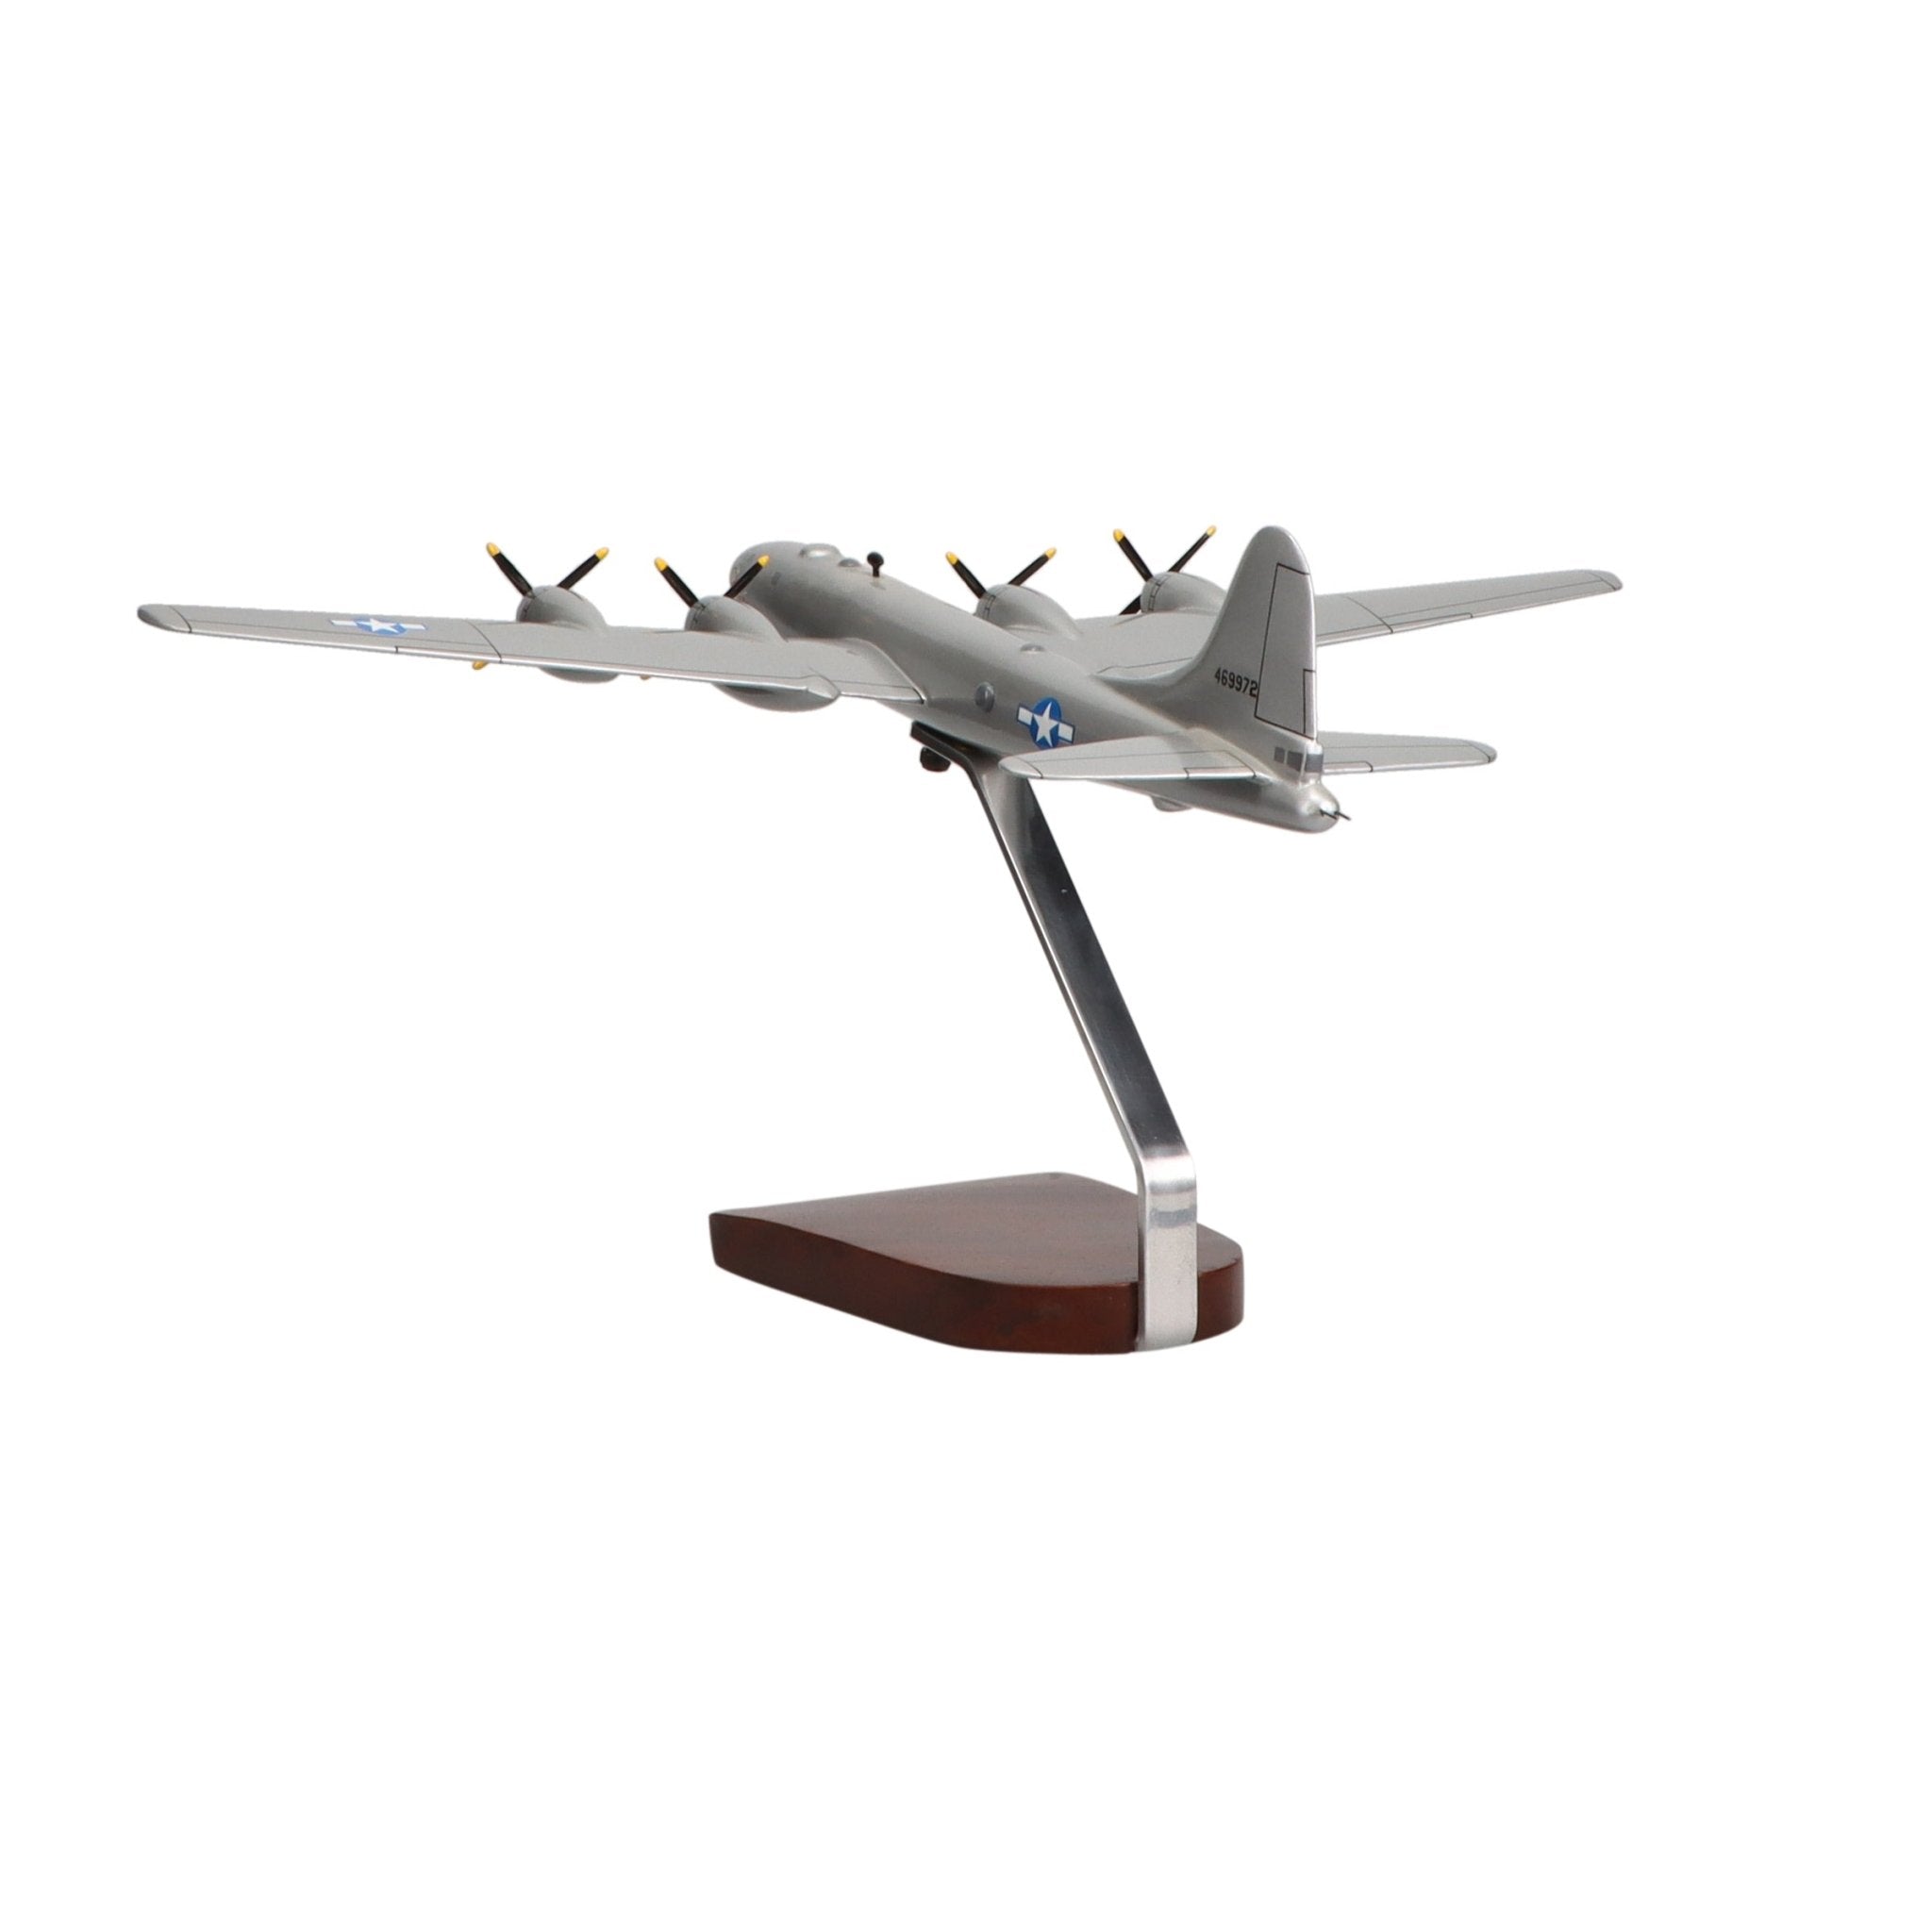 Boeing B-29 Superfortress (Doc) Limited Edition Large Mahogany Model - PilotMall.com